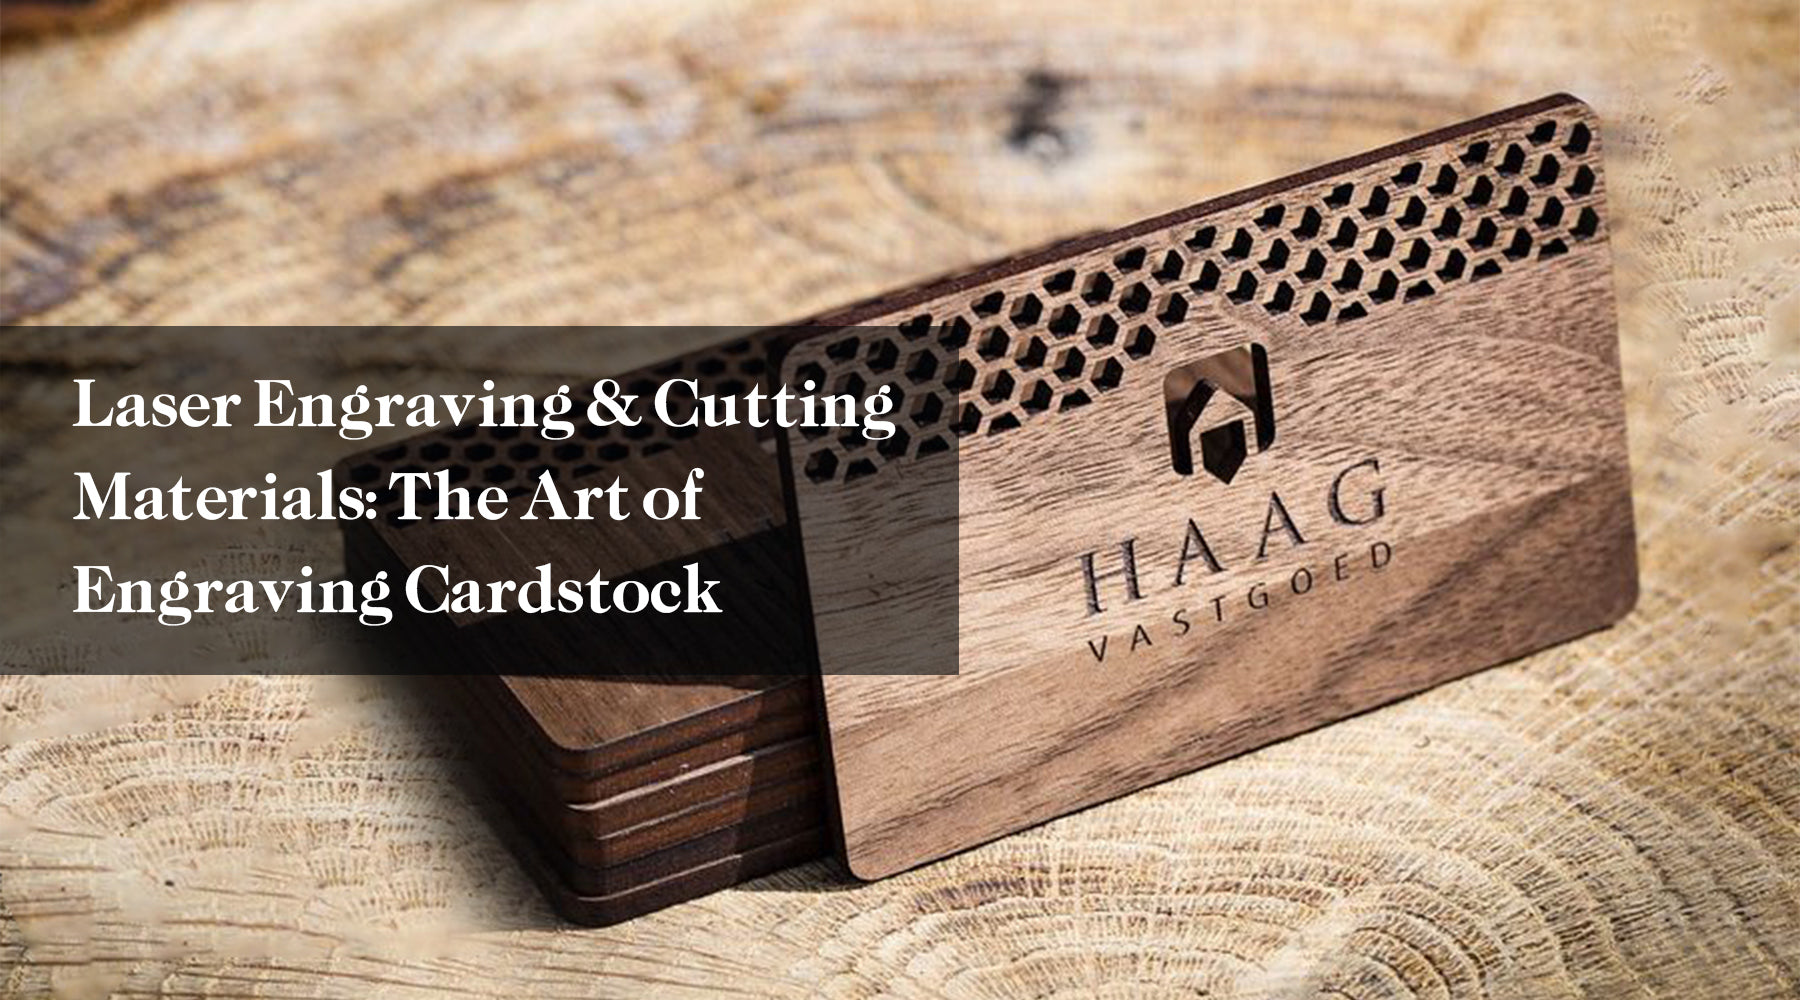 Laser Engraving & Cutting Materials: The Art of Engraving Cardstock